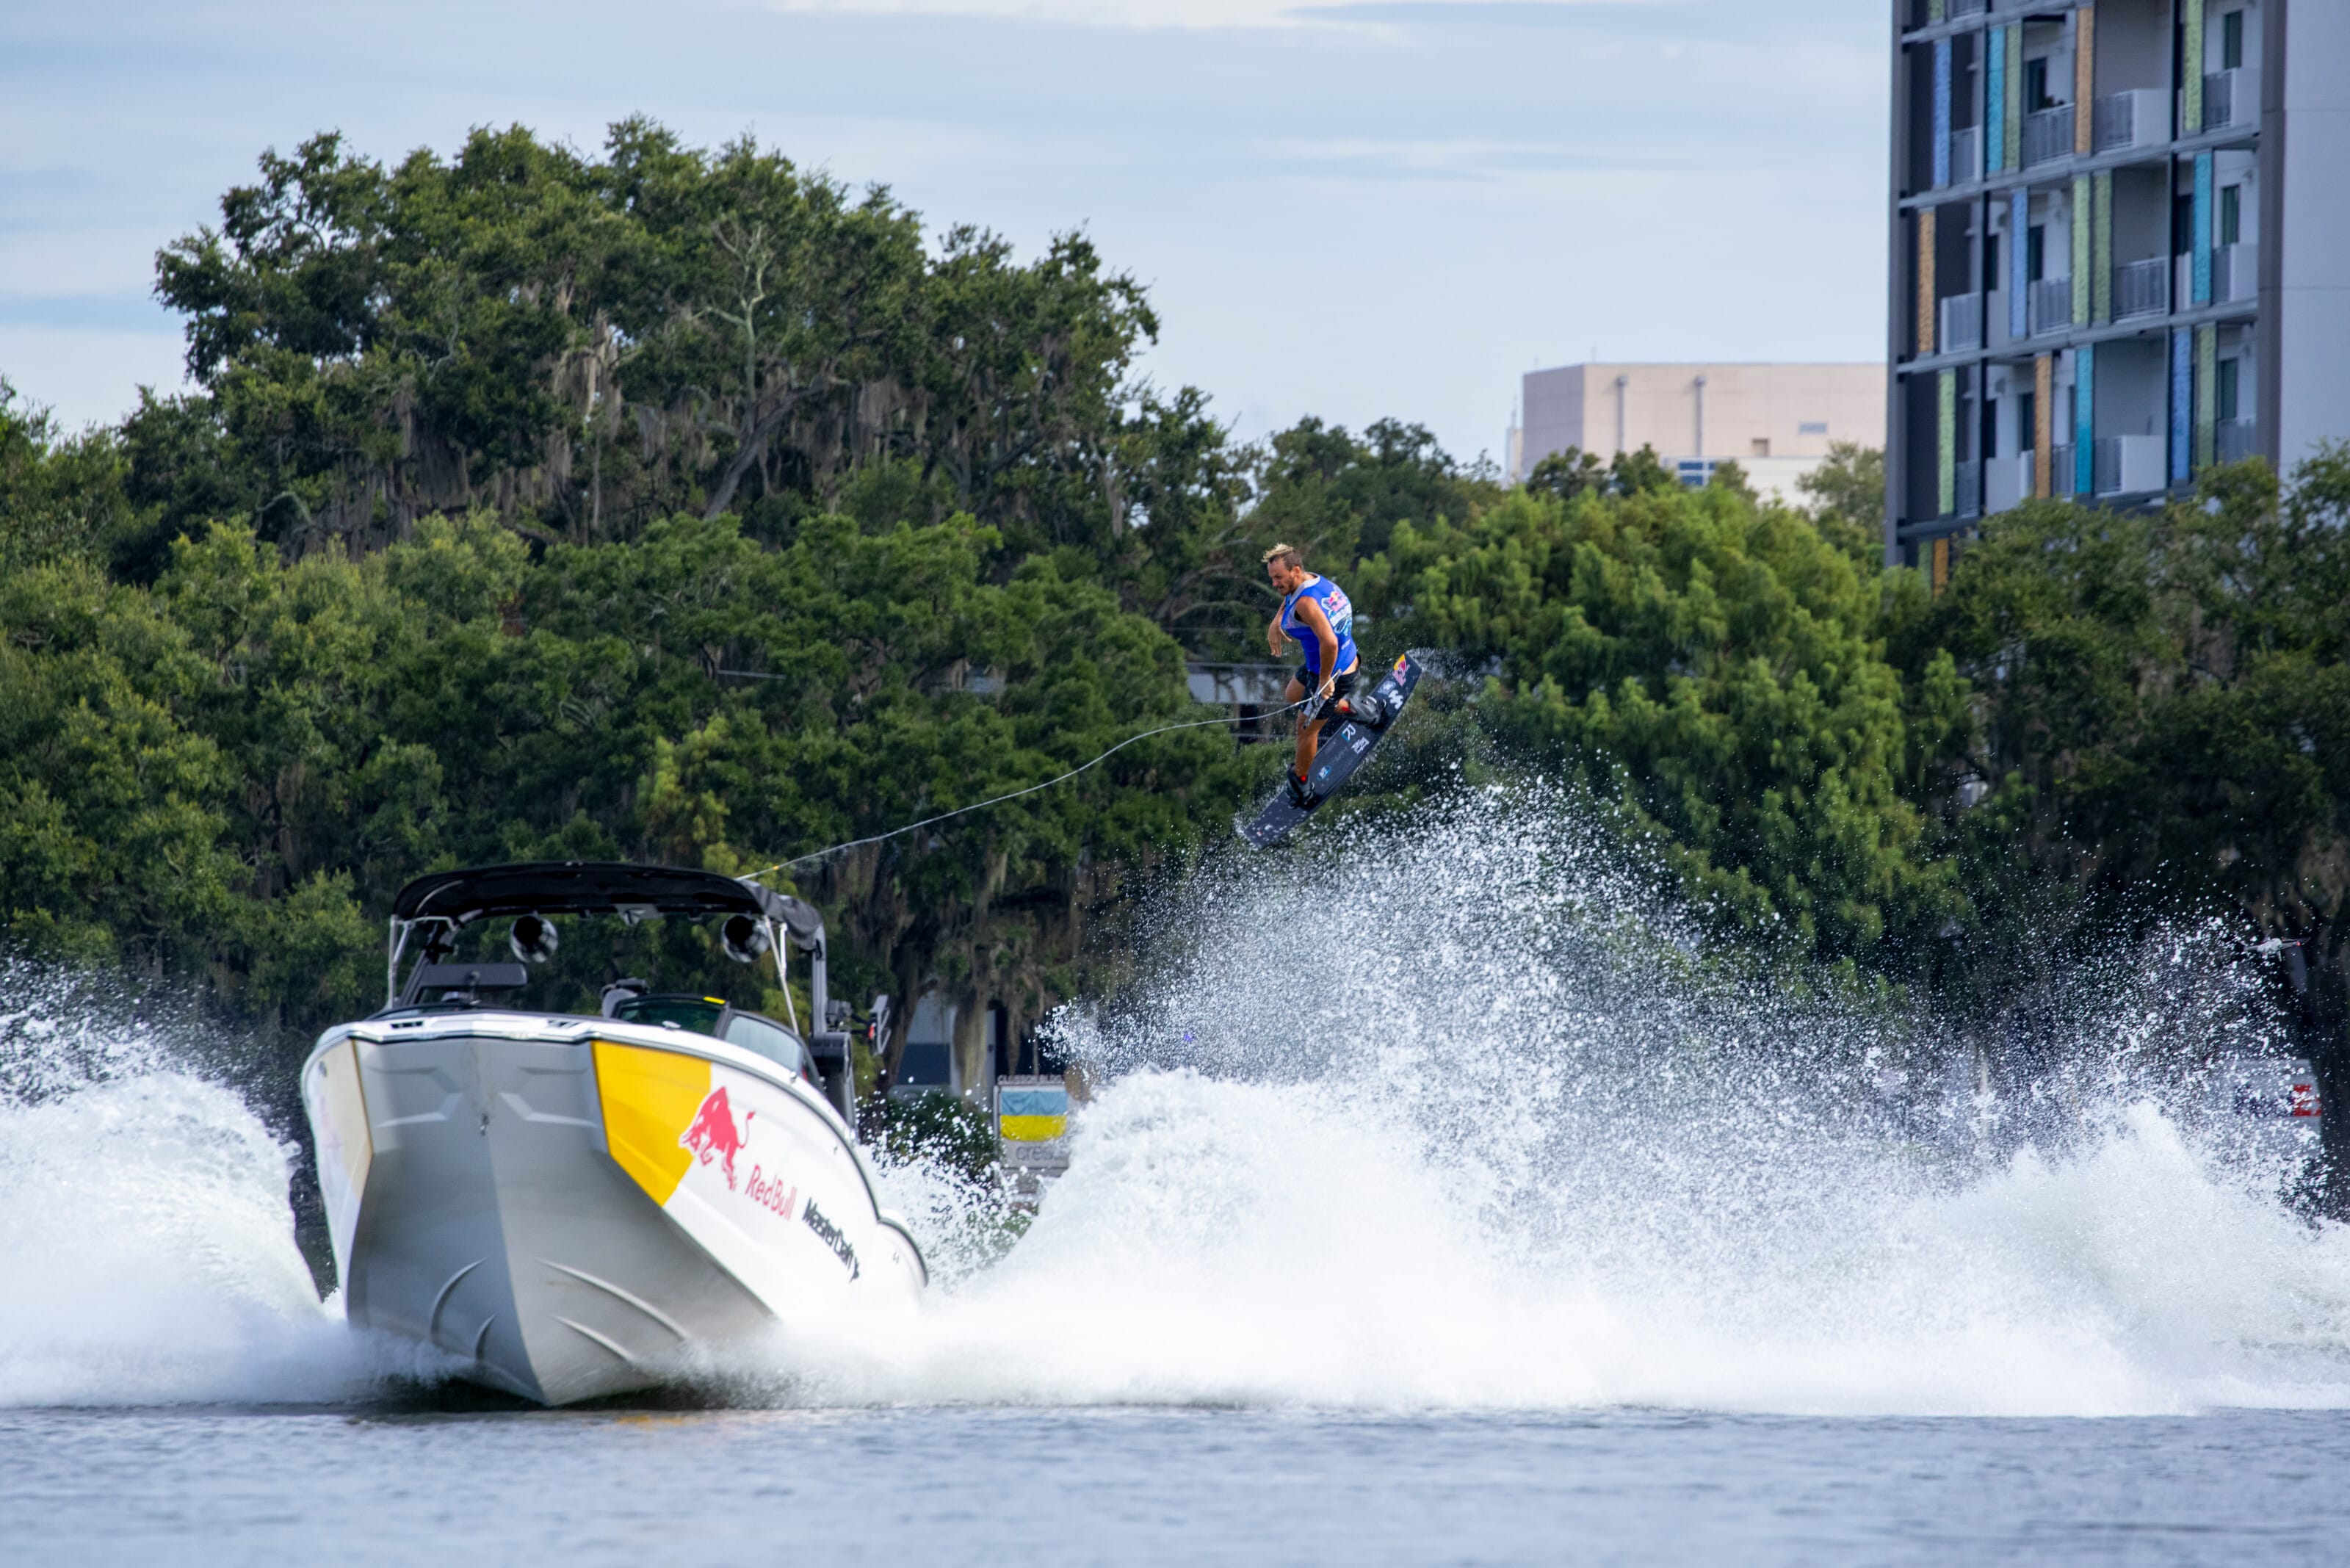 Best wakeboarders in the world: These are the top 10!